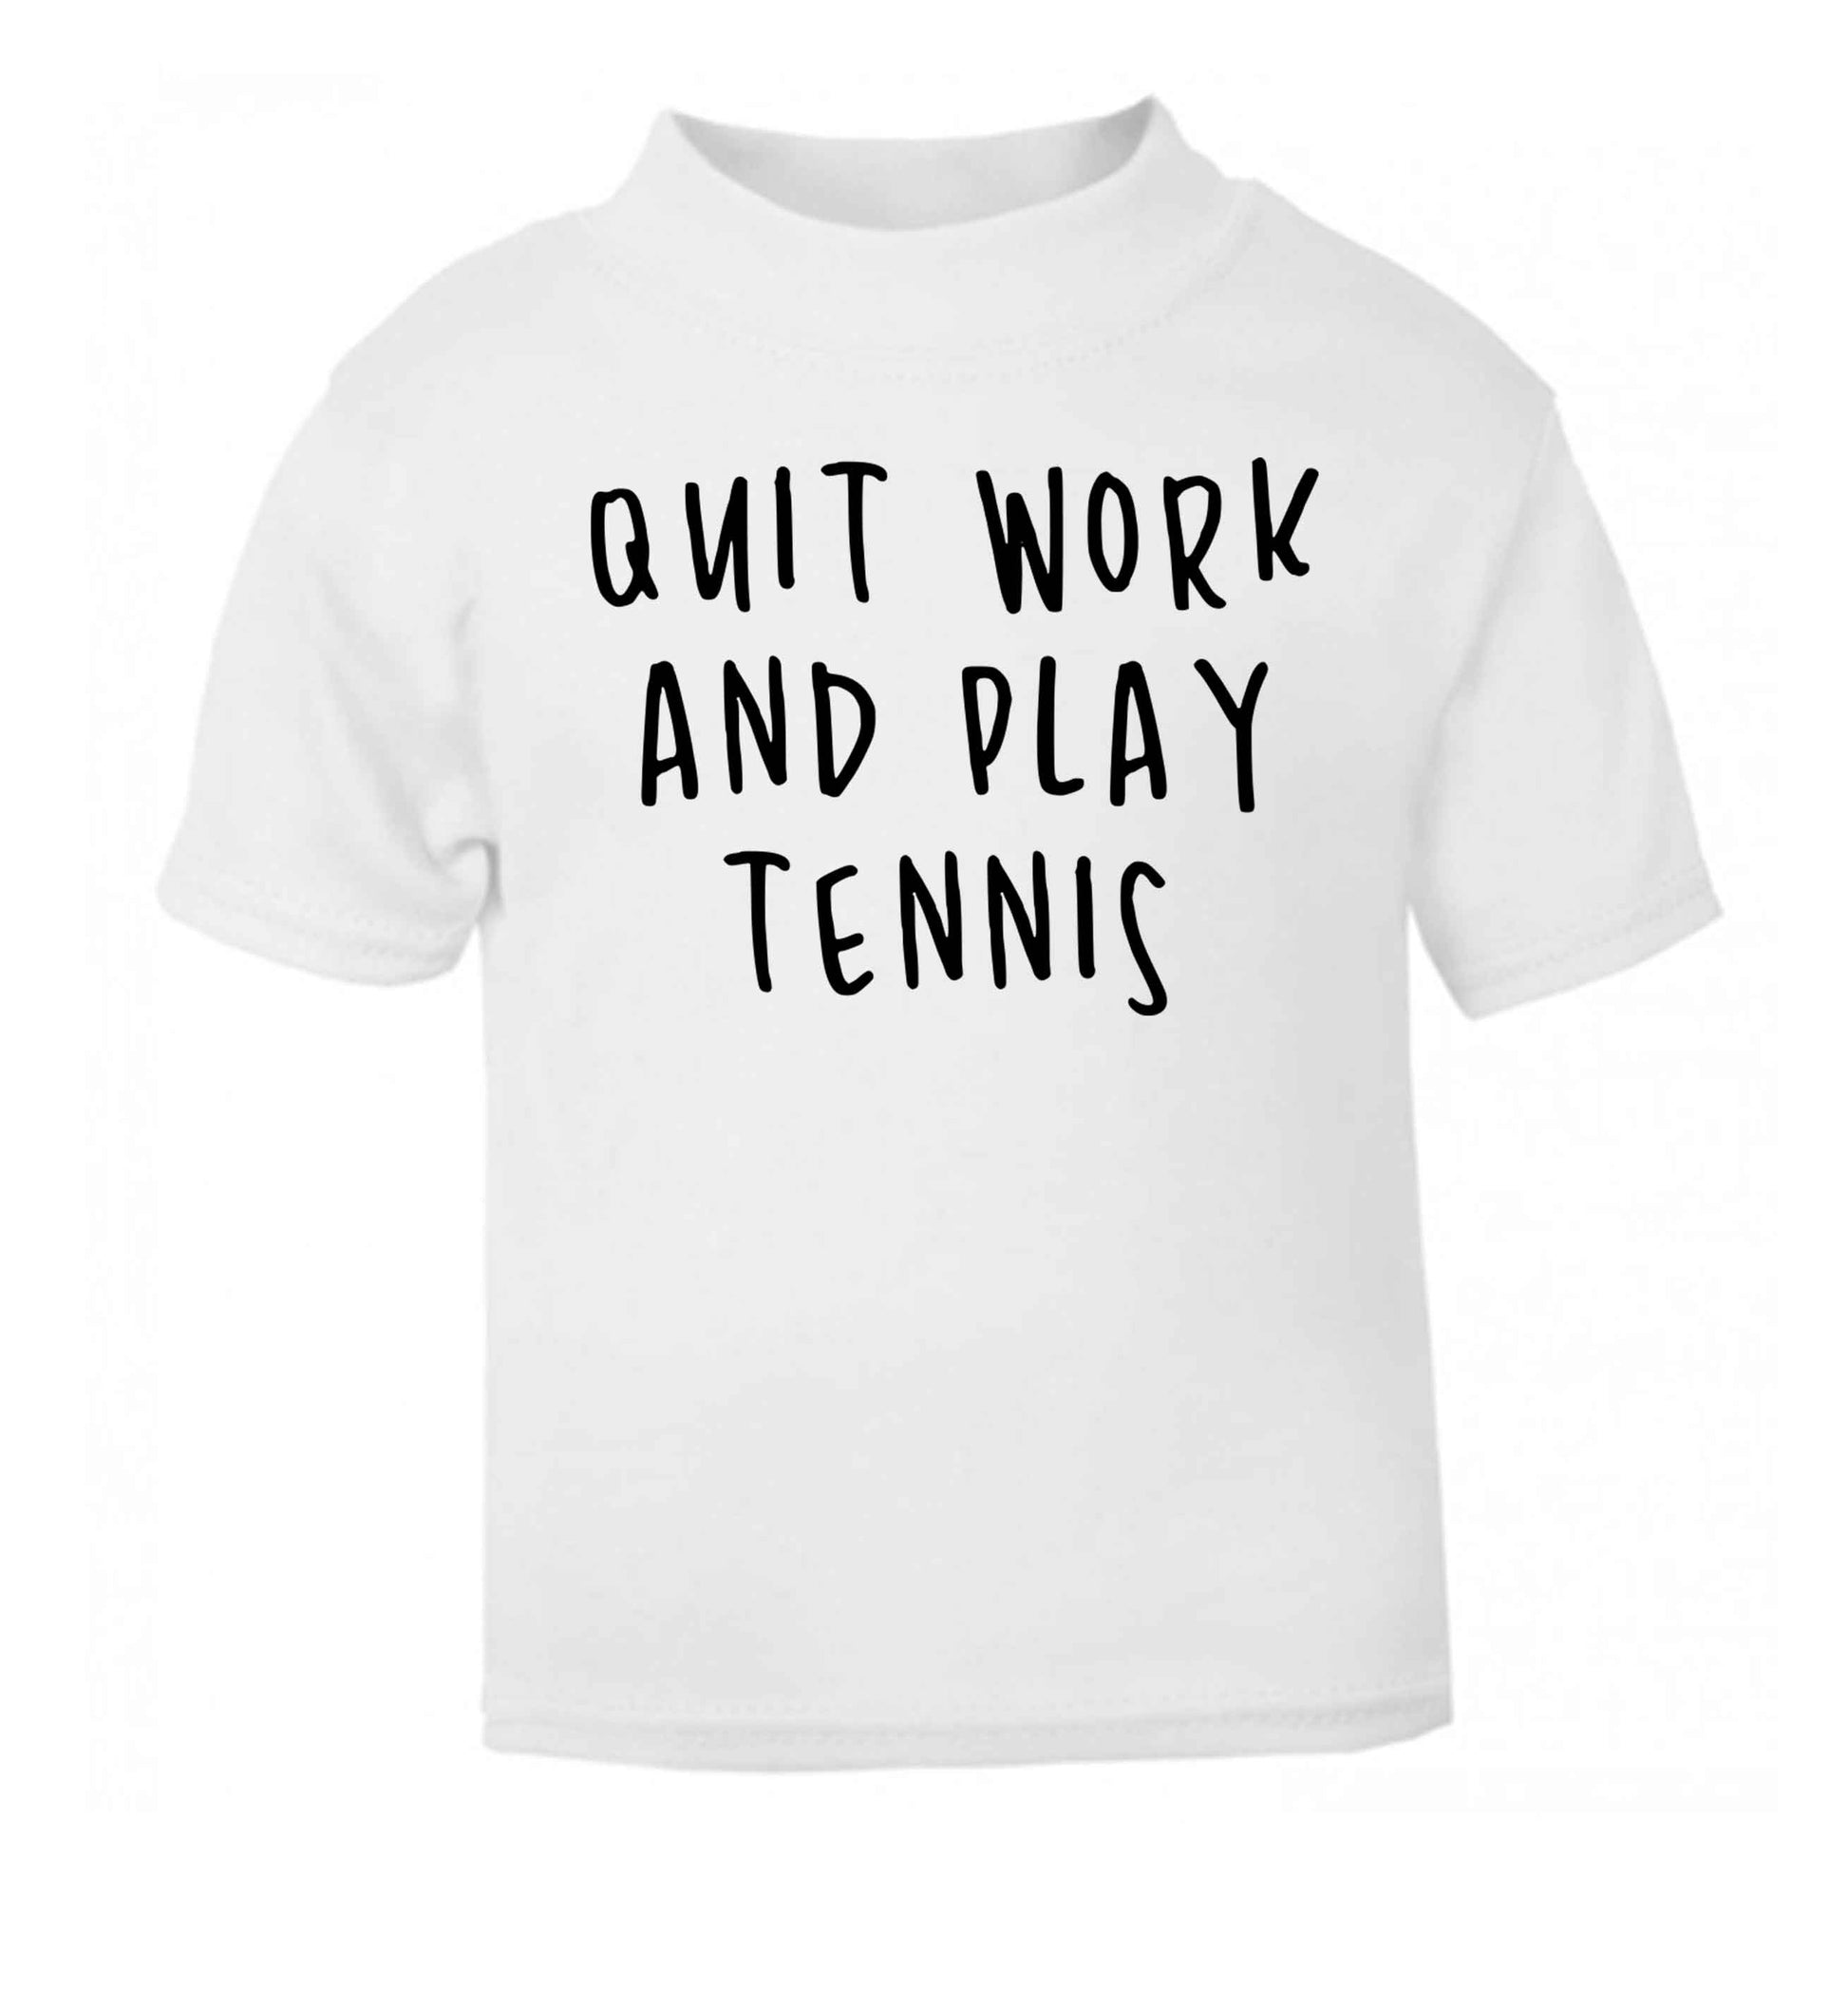 Quit work and play tennis white Baby Toddler Tshirt 2 Years